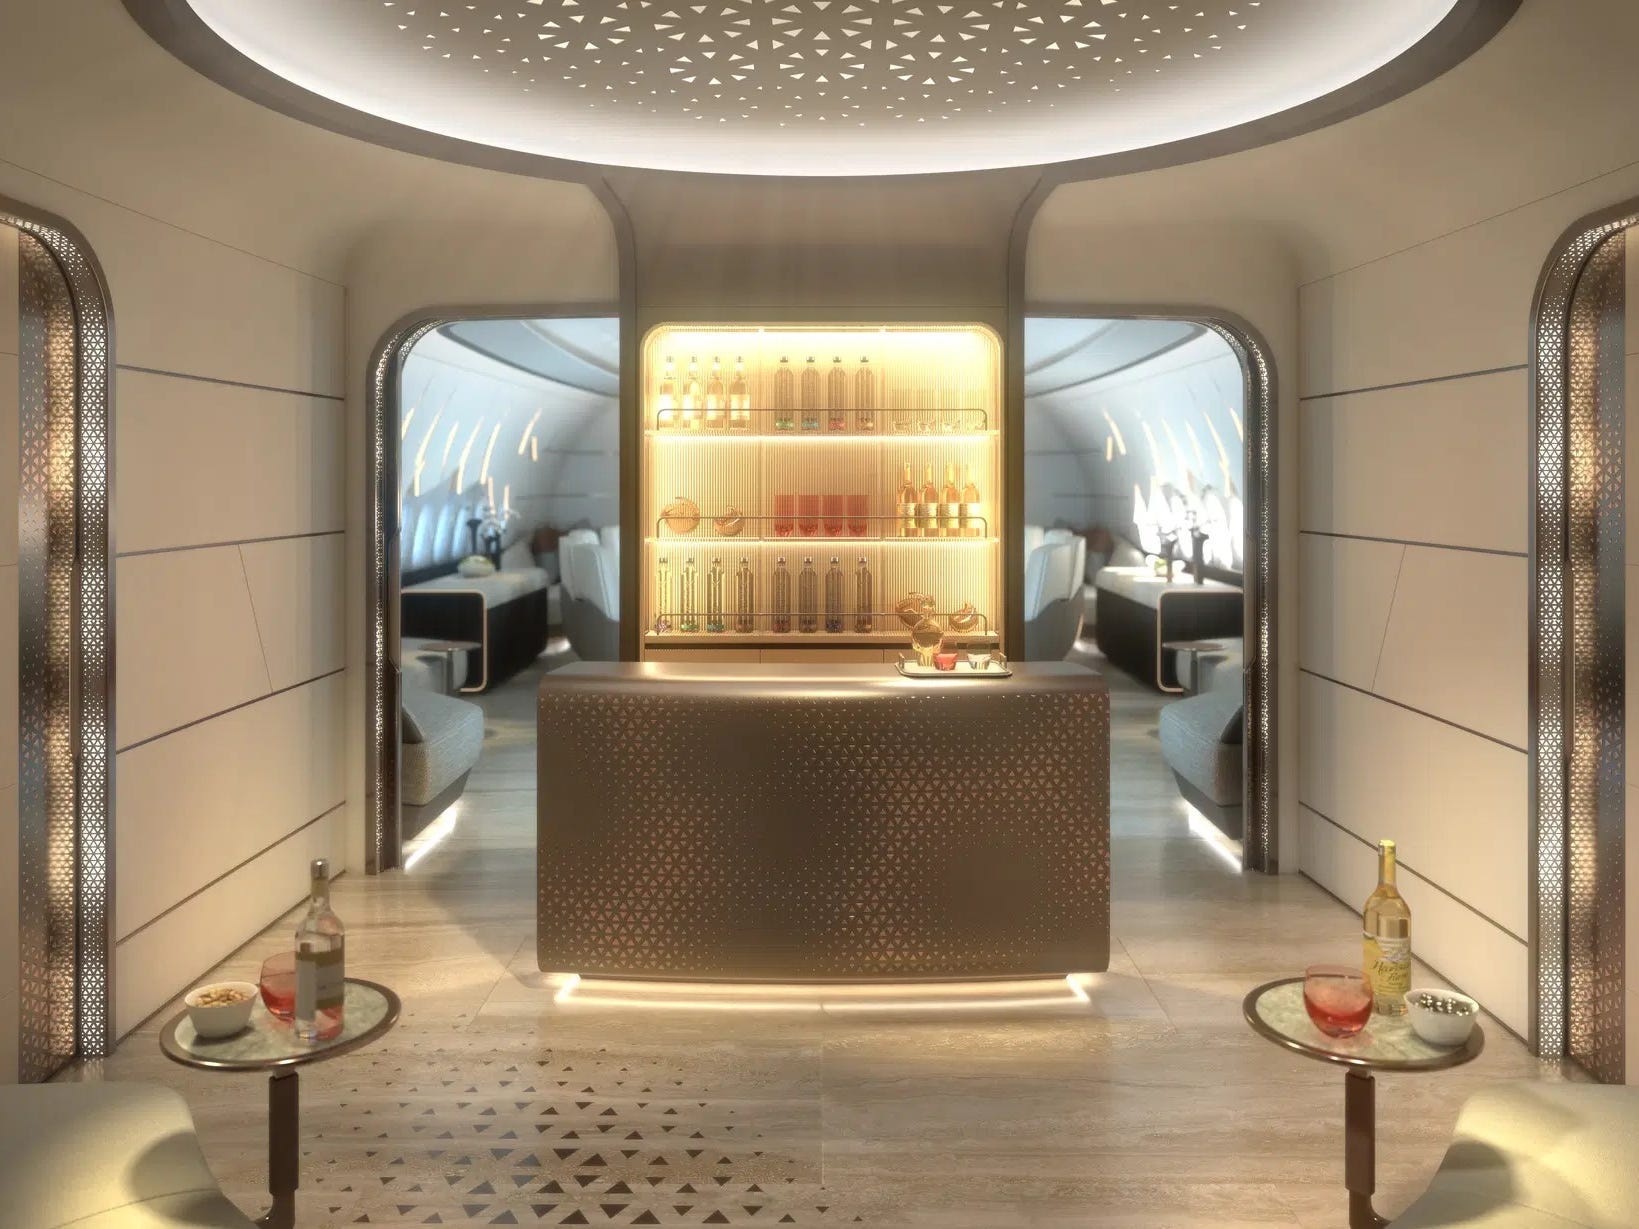 The entrace to the jet with a bar and couches.